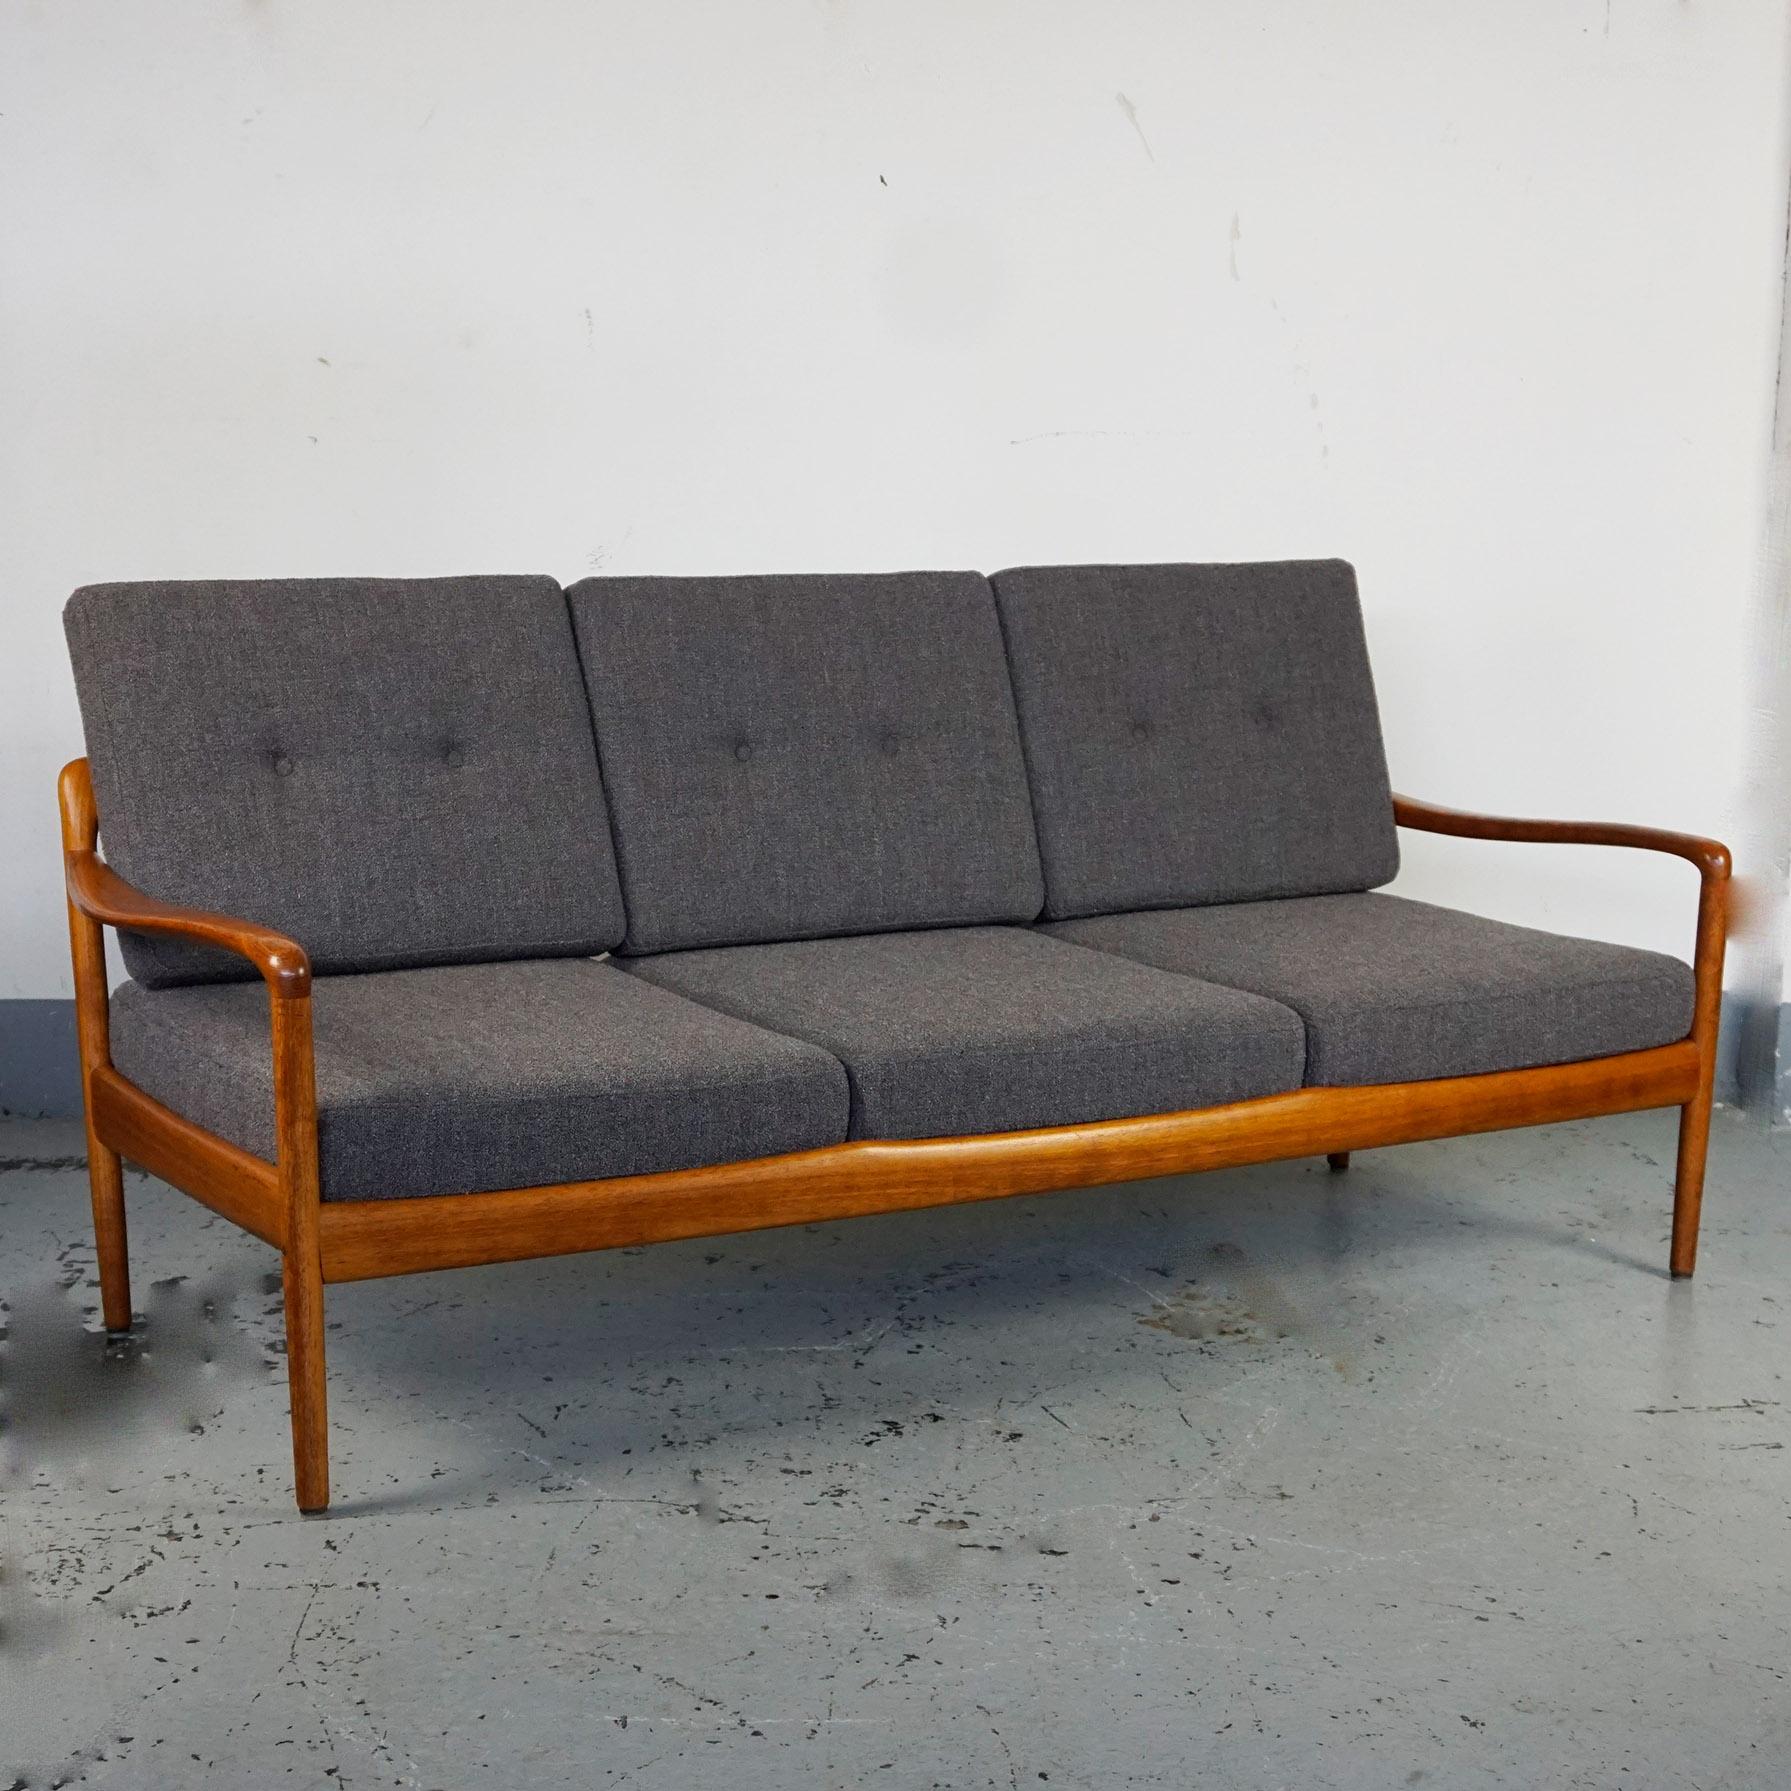 Organic 1960s teak 3-seat sofa in very good condition with new Kvadrat fabric upholsterd cushions by Knoll Antimott, Germany 1960s, Mid-Century Modern design. The legendary 